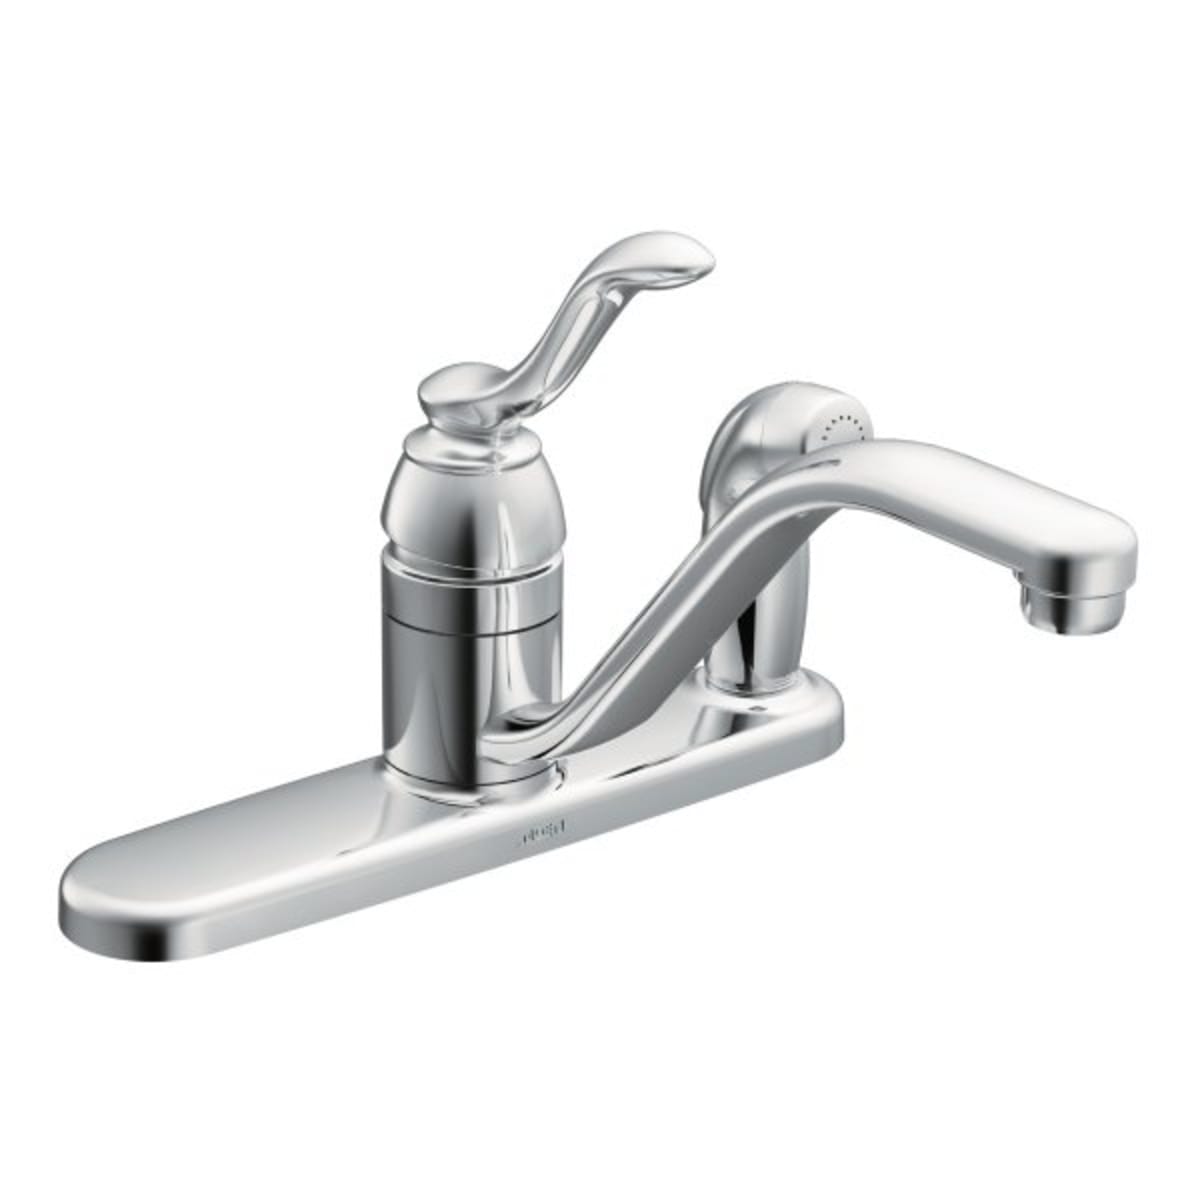 Moen Torrance Chrome 1 5gpm One Handle Kitchen Faucet No Side